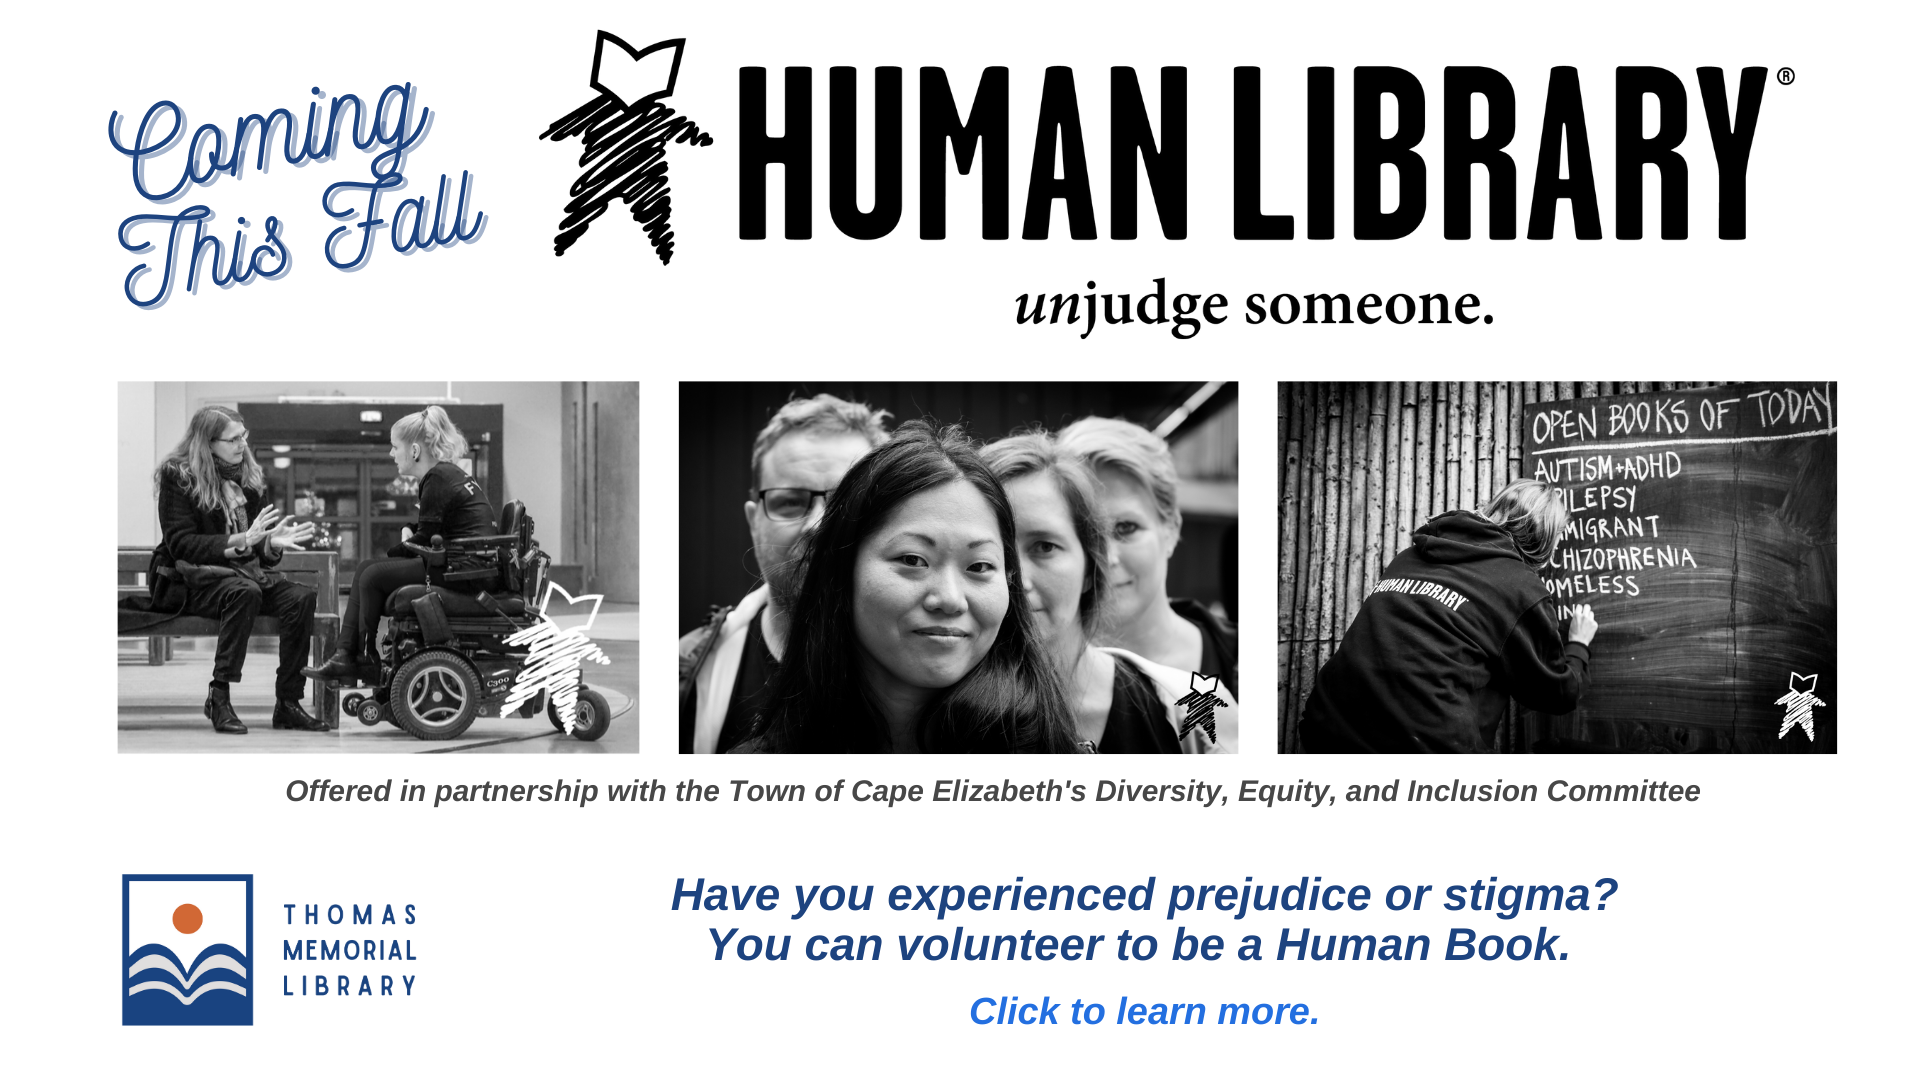 Volunteer to be a Human Book at our Human Library event.